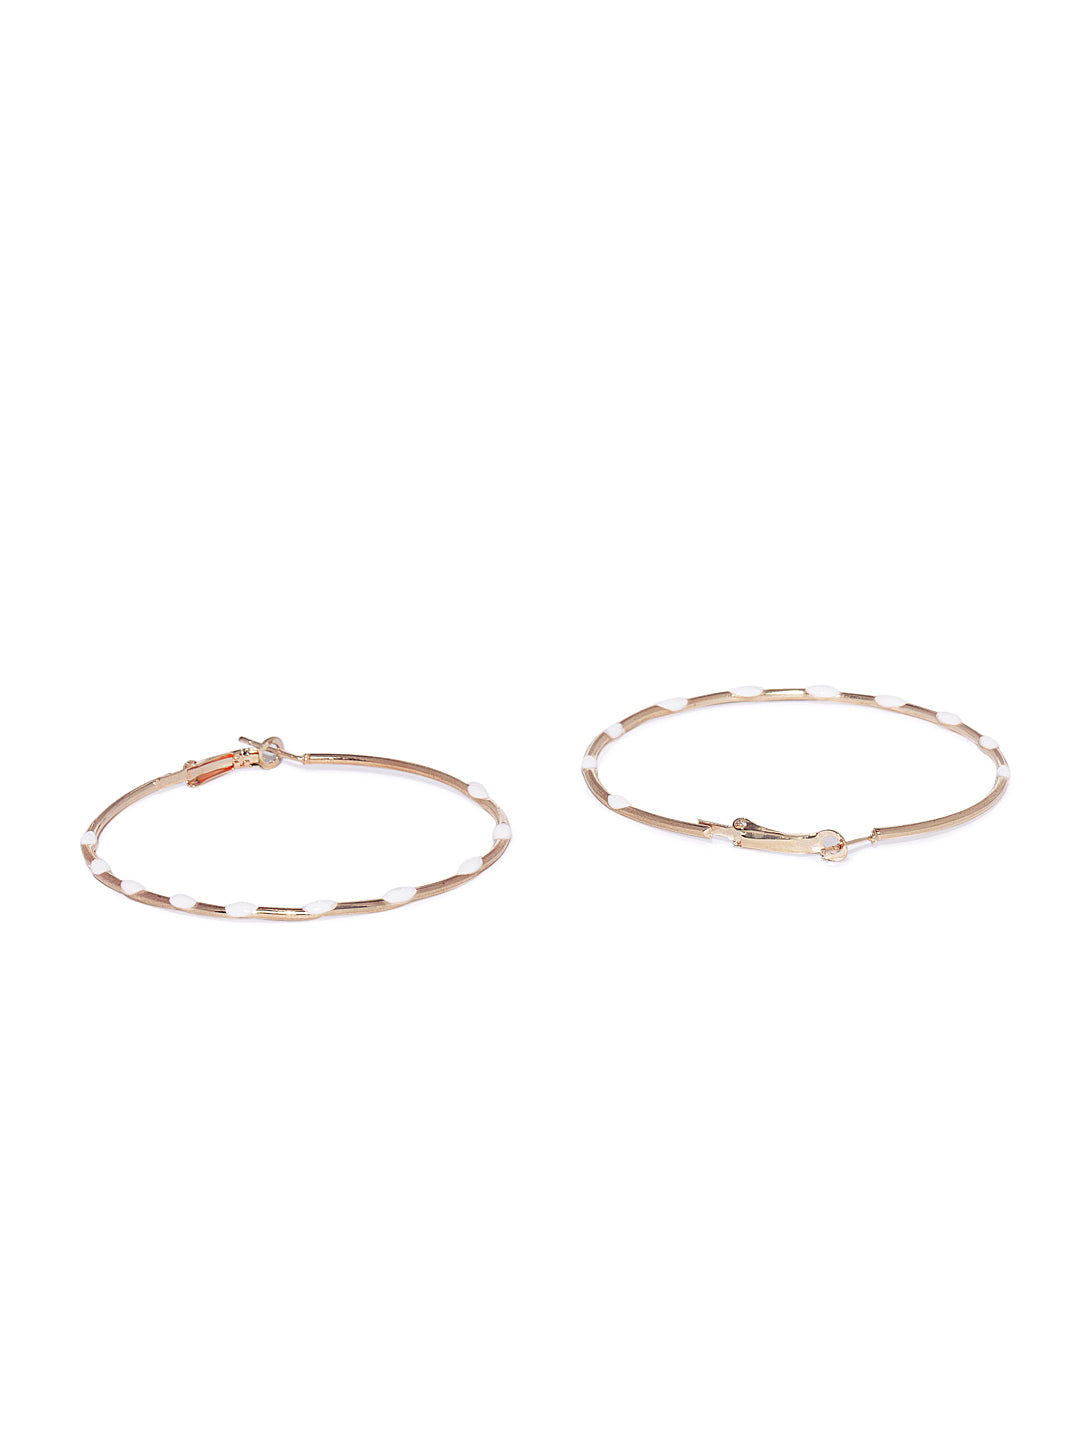 White Dotted Circular Hoops - ChicMela